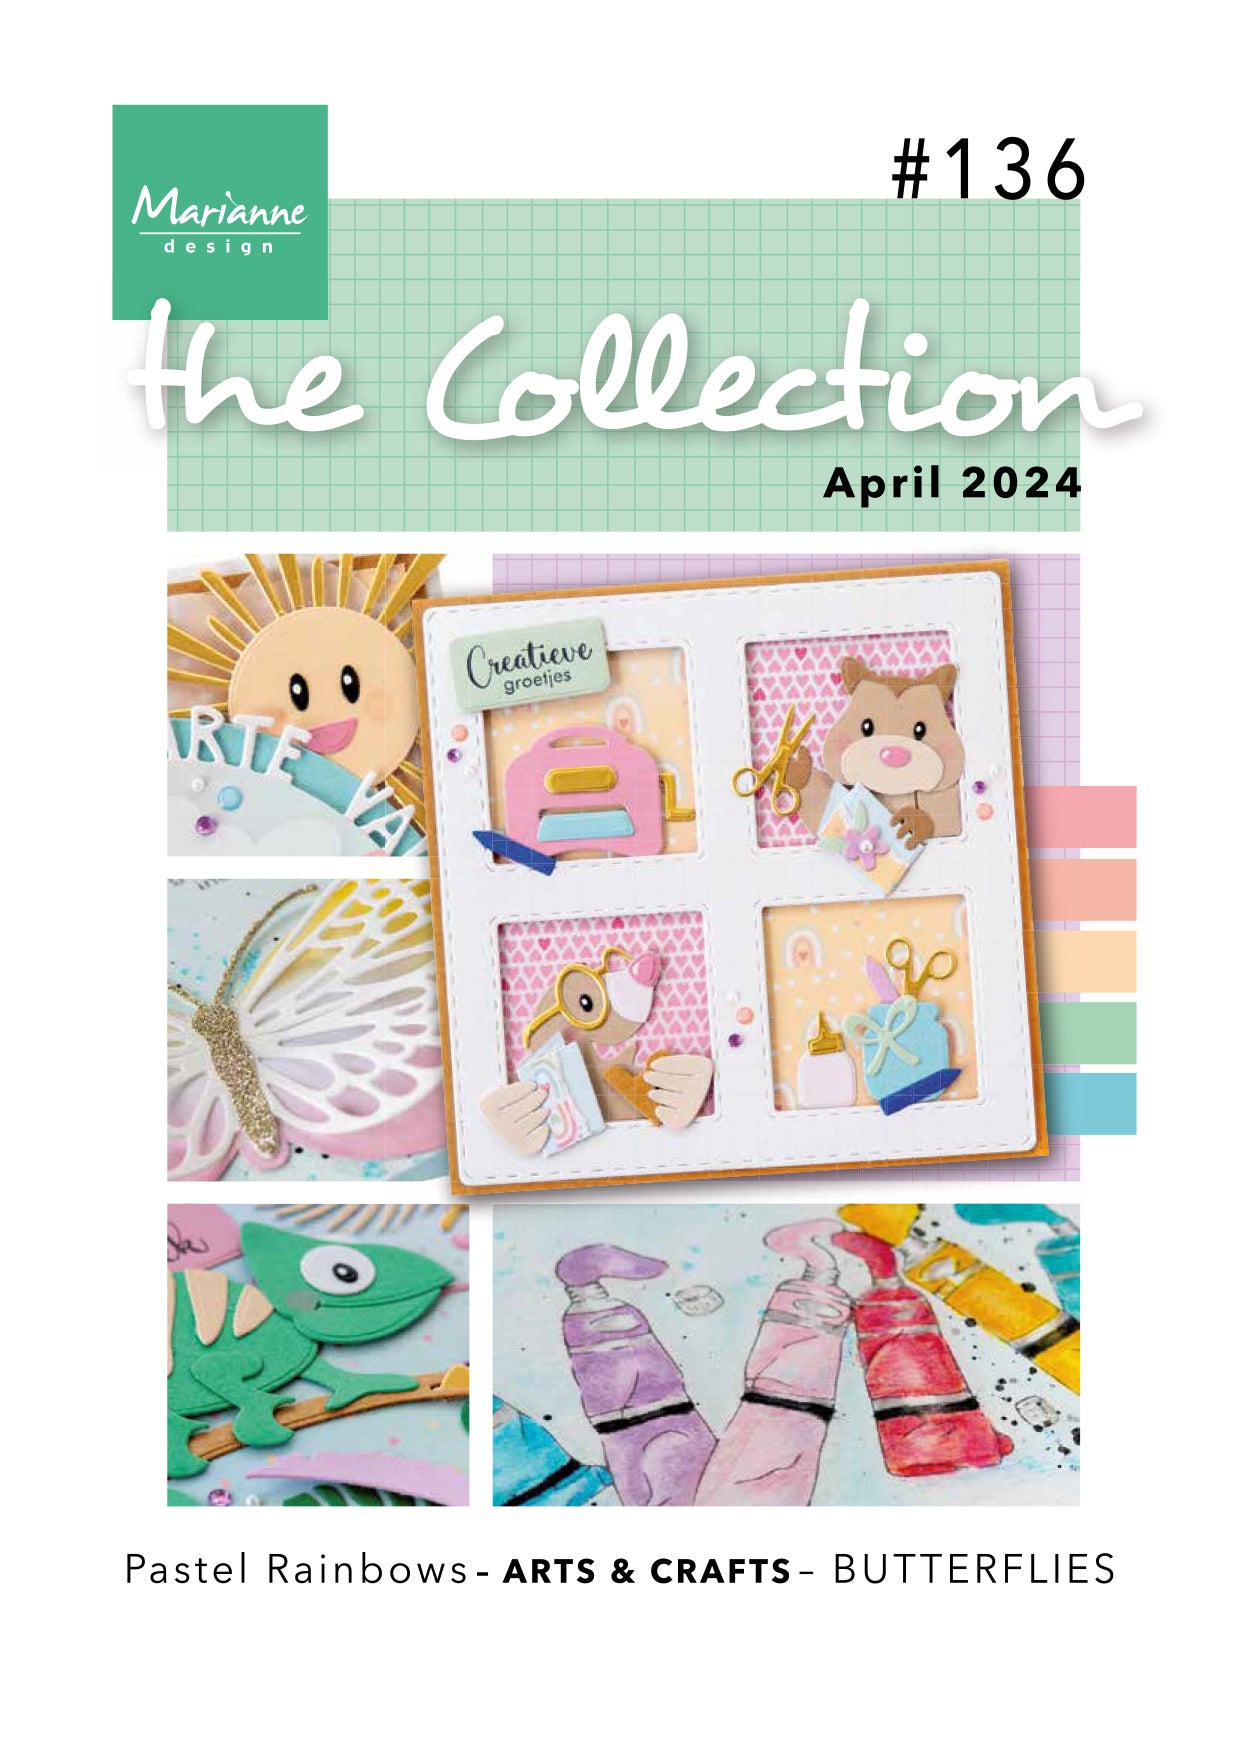 Marianne Design The Collection #136 April 2024